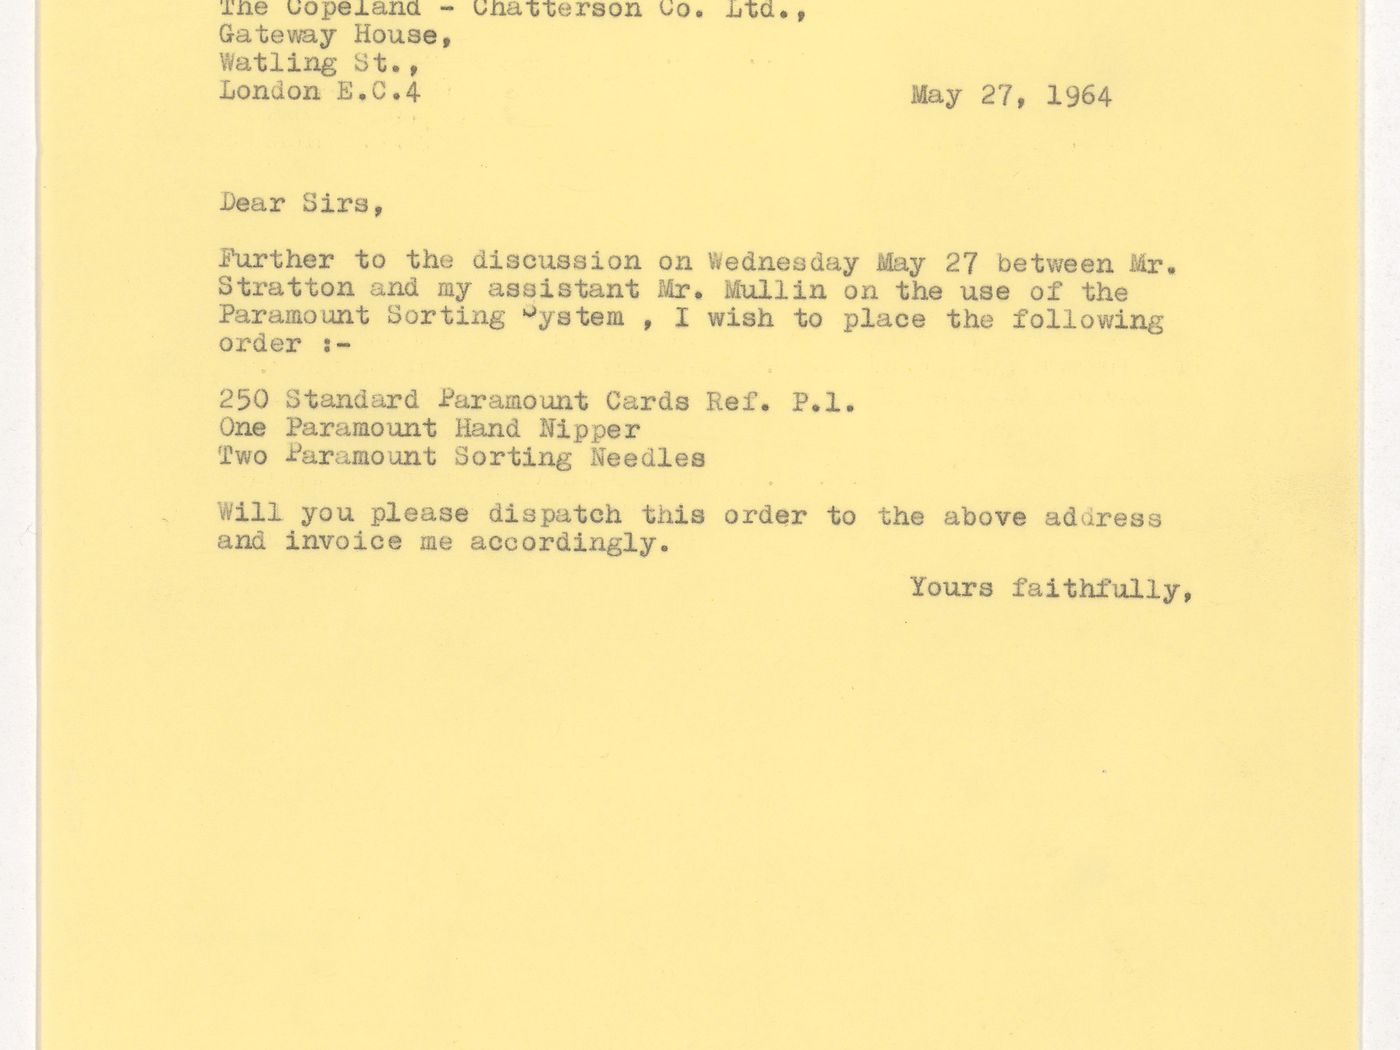 Letter, possibly from Cedric Price, to Copeland-Chatterson Co. Ltd. regarding the use of the Paramount Sorting System